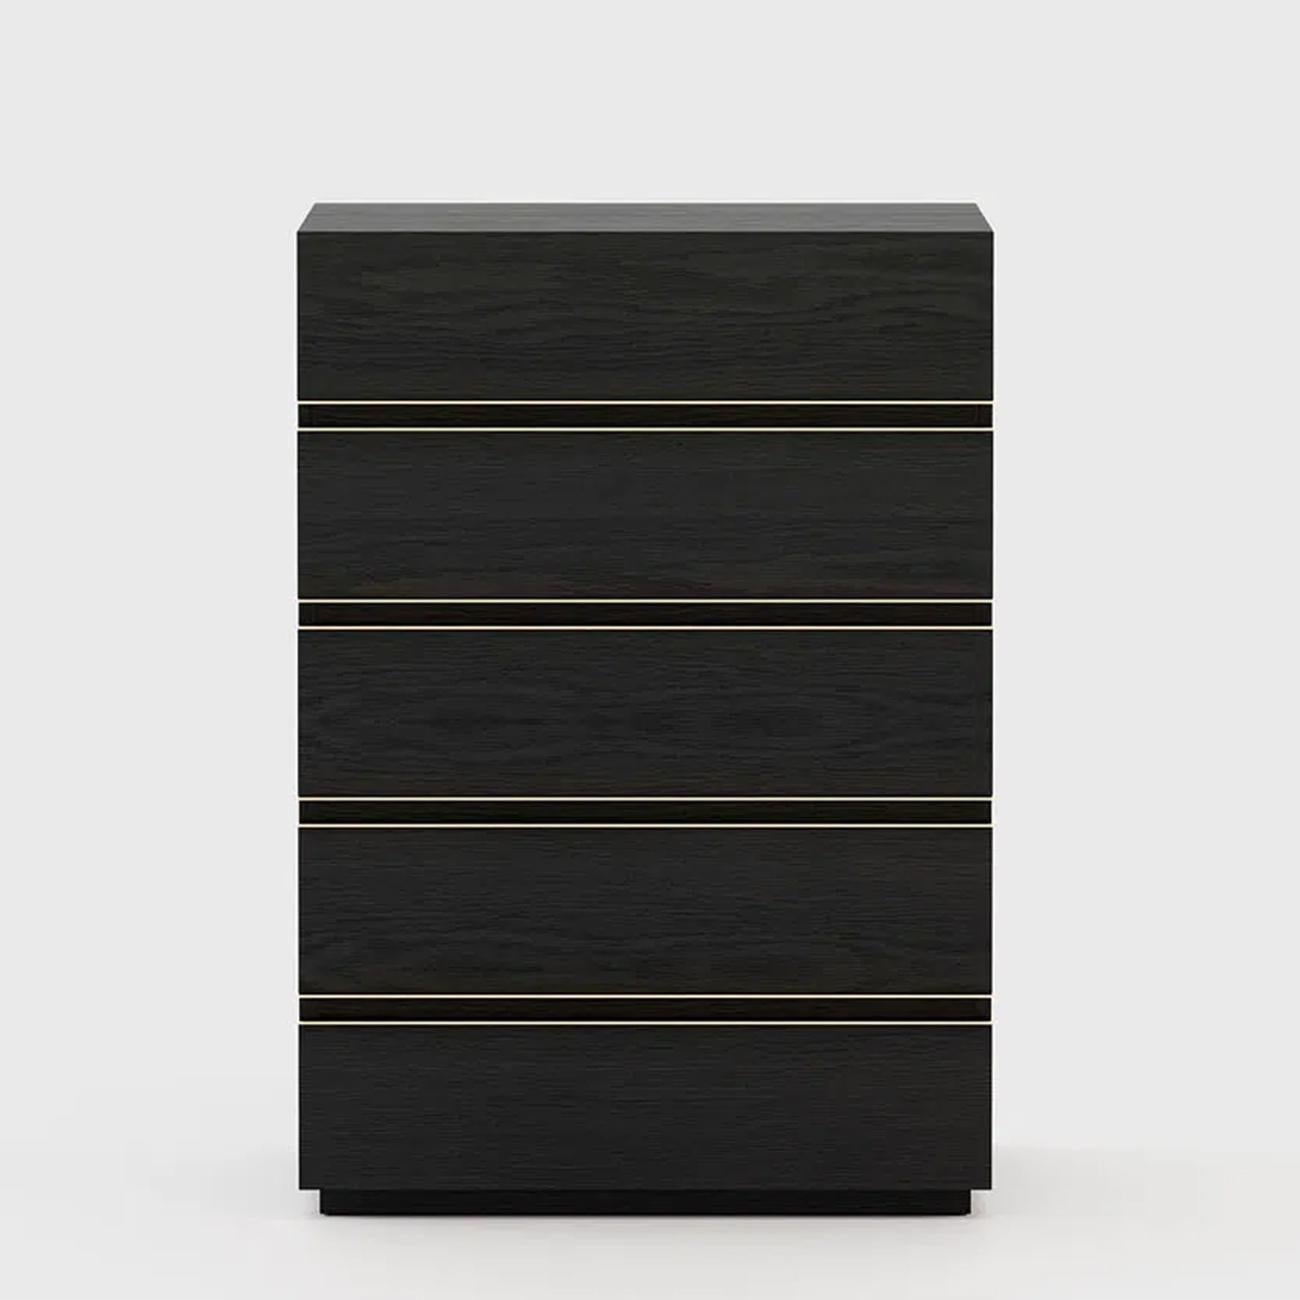 Chest of drawers Clark black ash high with structure
in ash wood in blackened matte finish. With polished
stainless steel trims in gold finish. Including 5 drawers
with easy glide system.
Also available with other finishes on request.